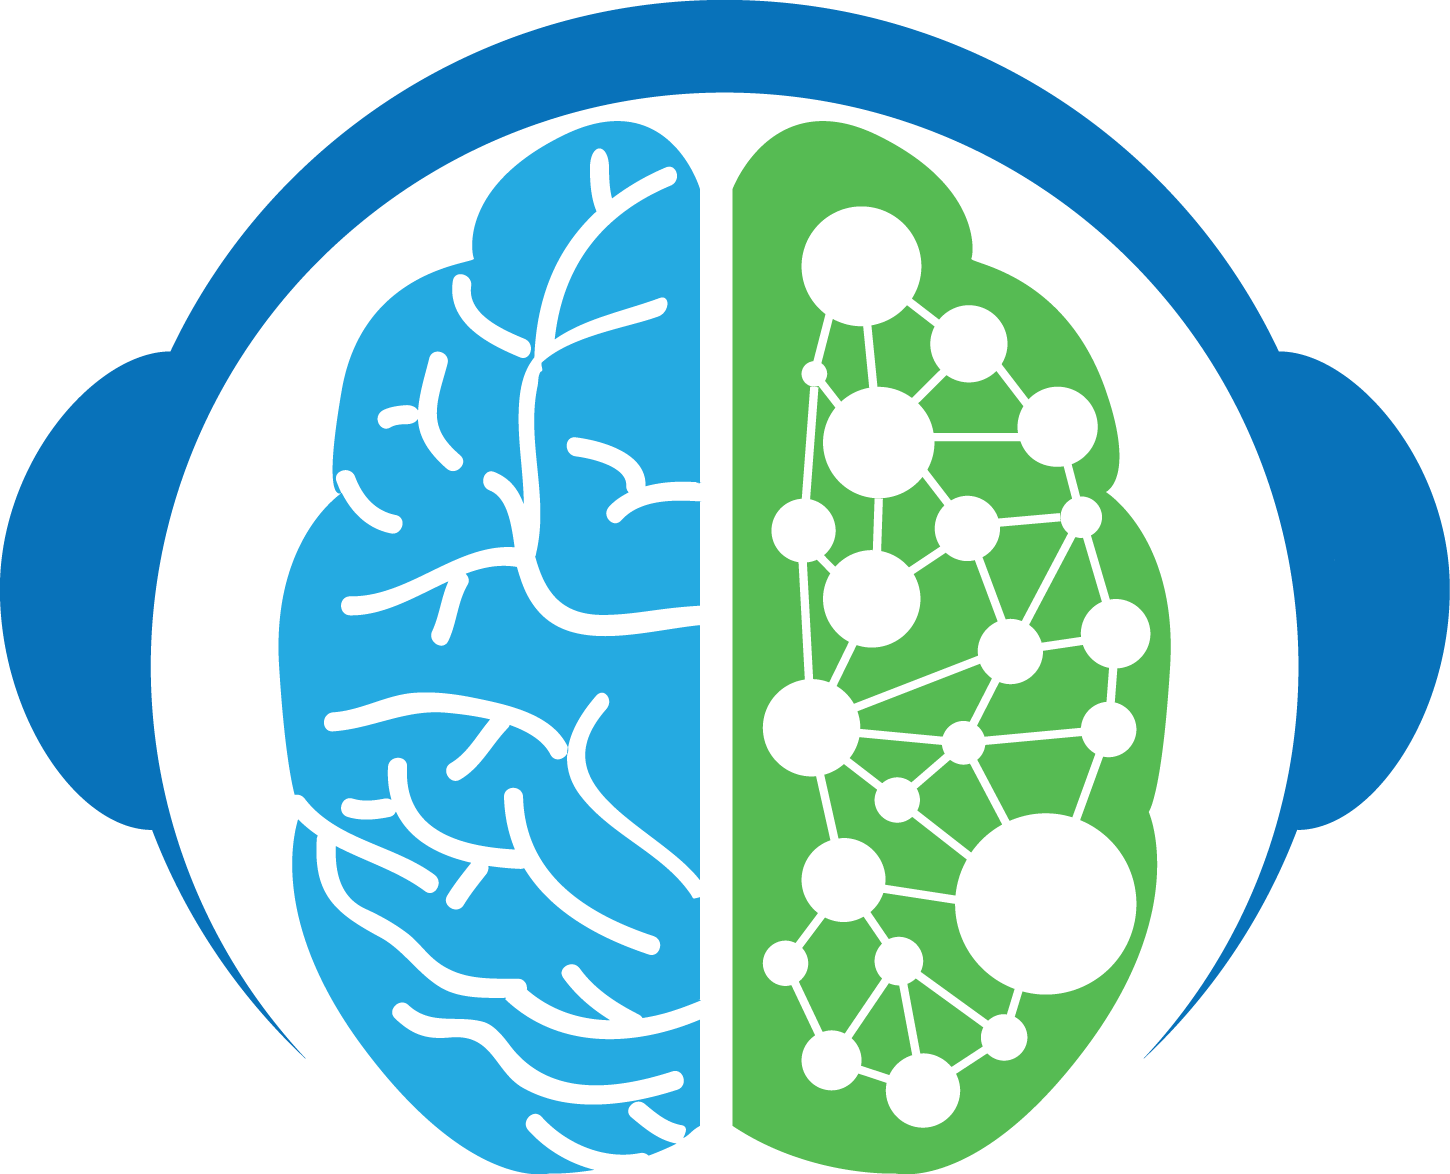 A Blue And Green Brain With Black Dots And Circles